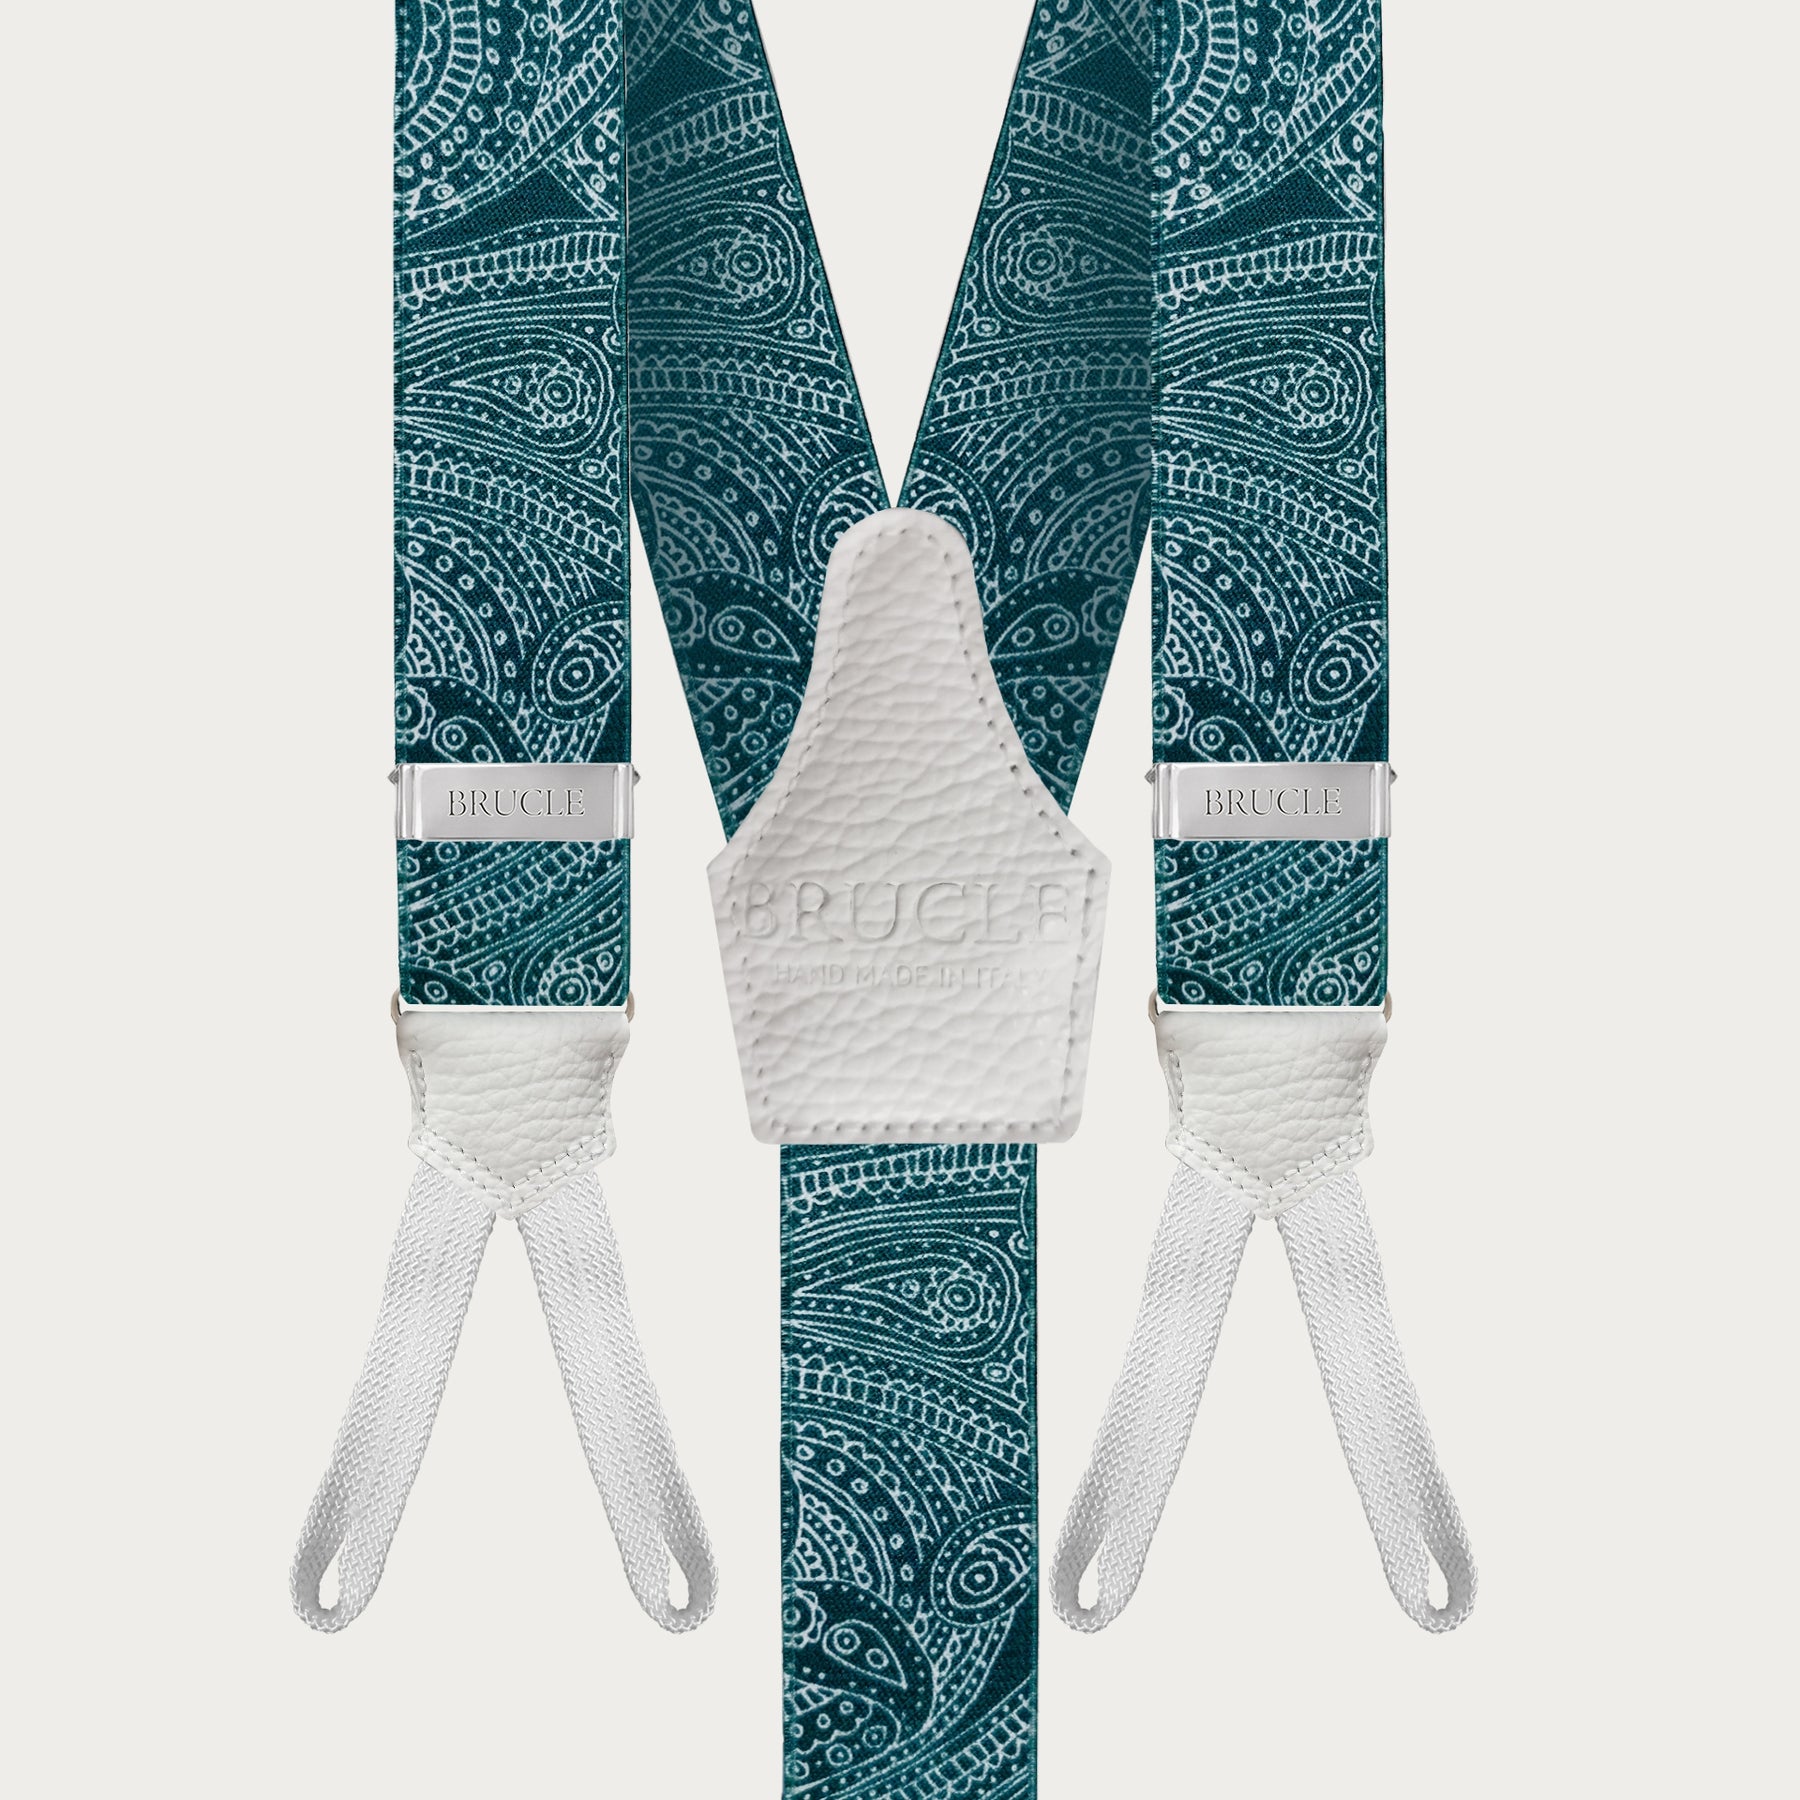 Formal Y-shape suspenders with braid runners, petrol green and white